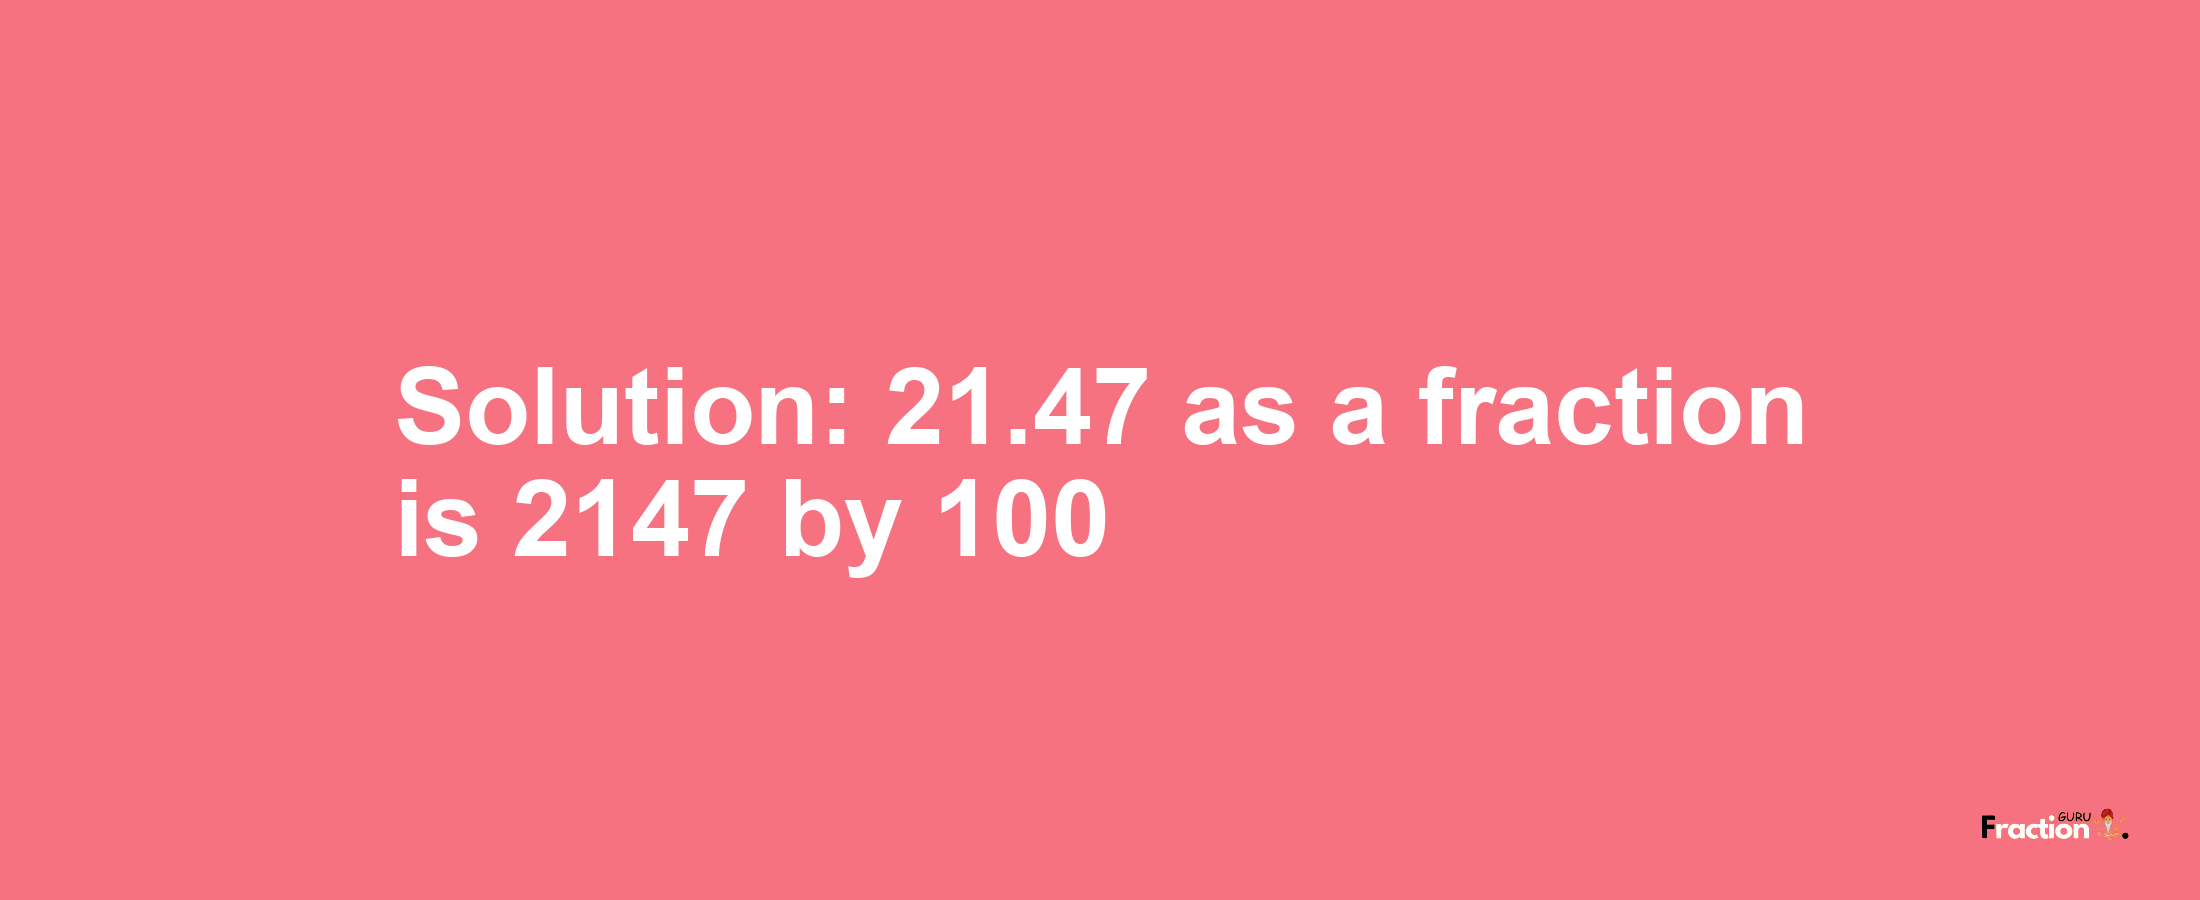 Solution:21.47 as a fraction is 2147/100